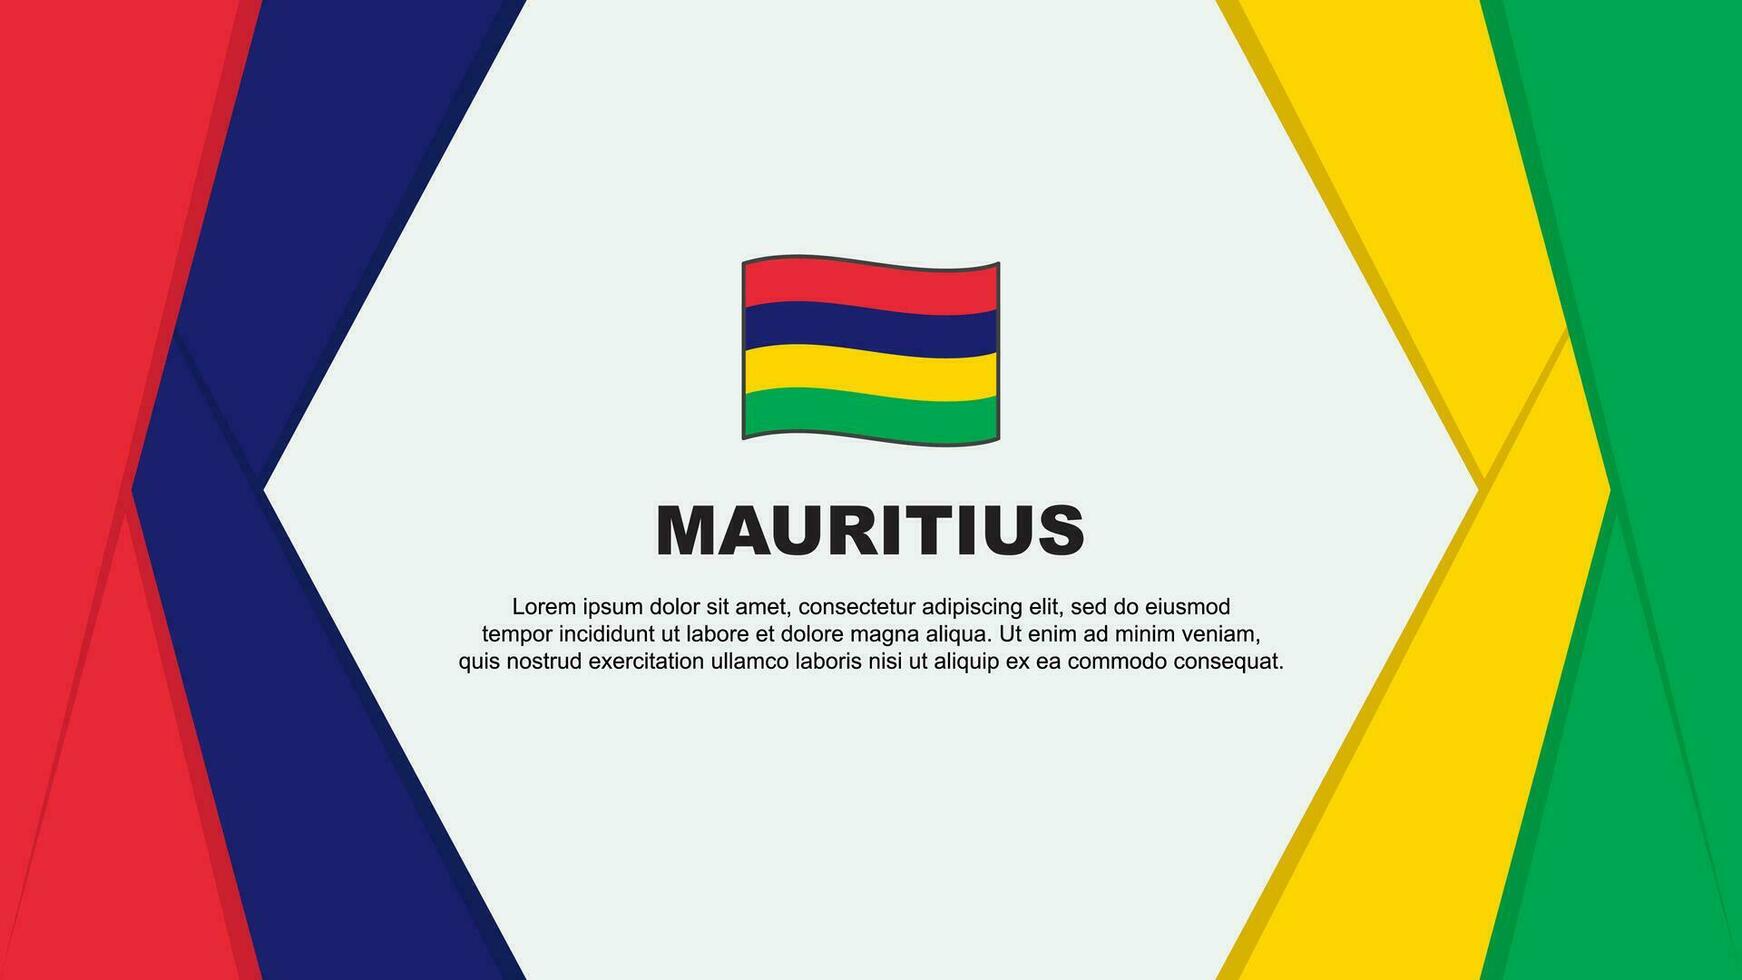 Mauritius Flag Abstract Background Design Template. Mauritius Independence Day Banner Cartoon Vector Illustration. Mauritius Background